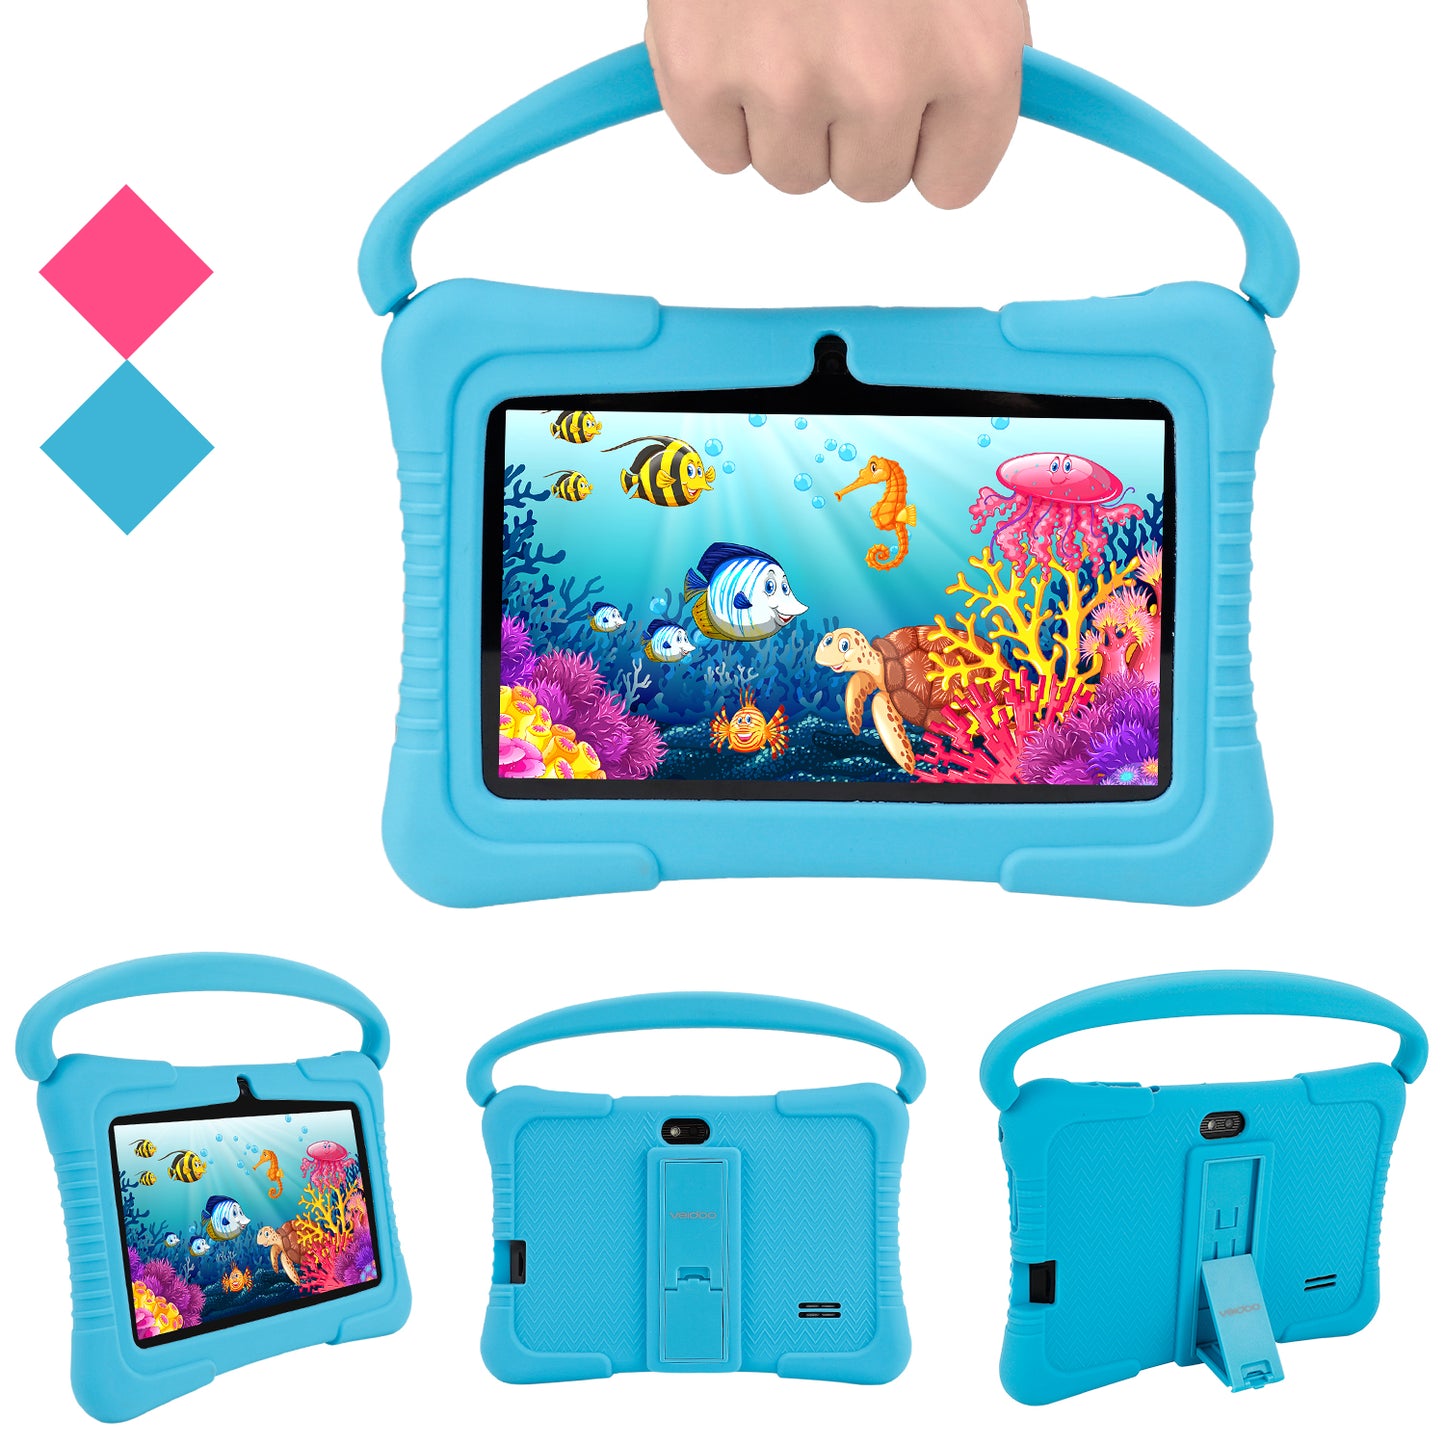 Kids Tablet Eye Protection HD Screen Parent Control Pre-Installed Educational APP Android Tablets PC for Children